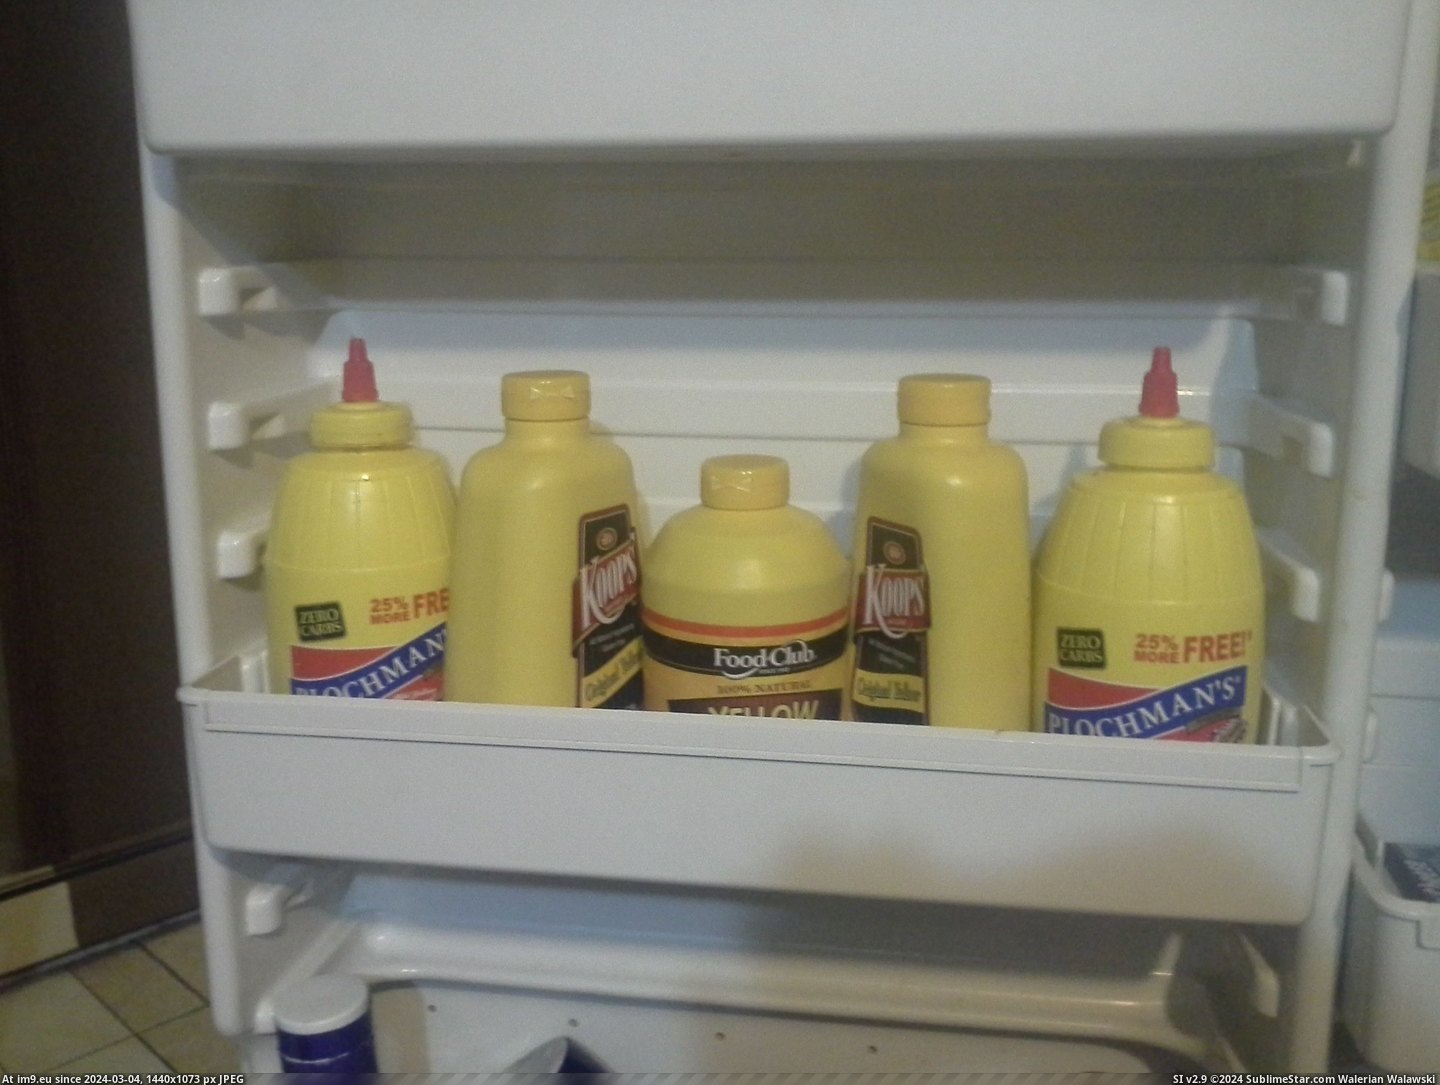 #Funny #Share #Condiments #Roommates #Refuse [Funny] This is what happens when your roommates refuse to share condiments Pic. (Bild von album My r/FUNNY favs))